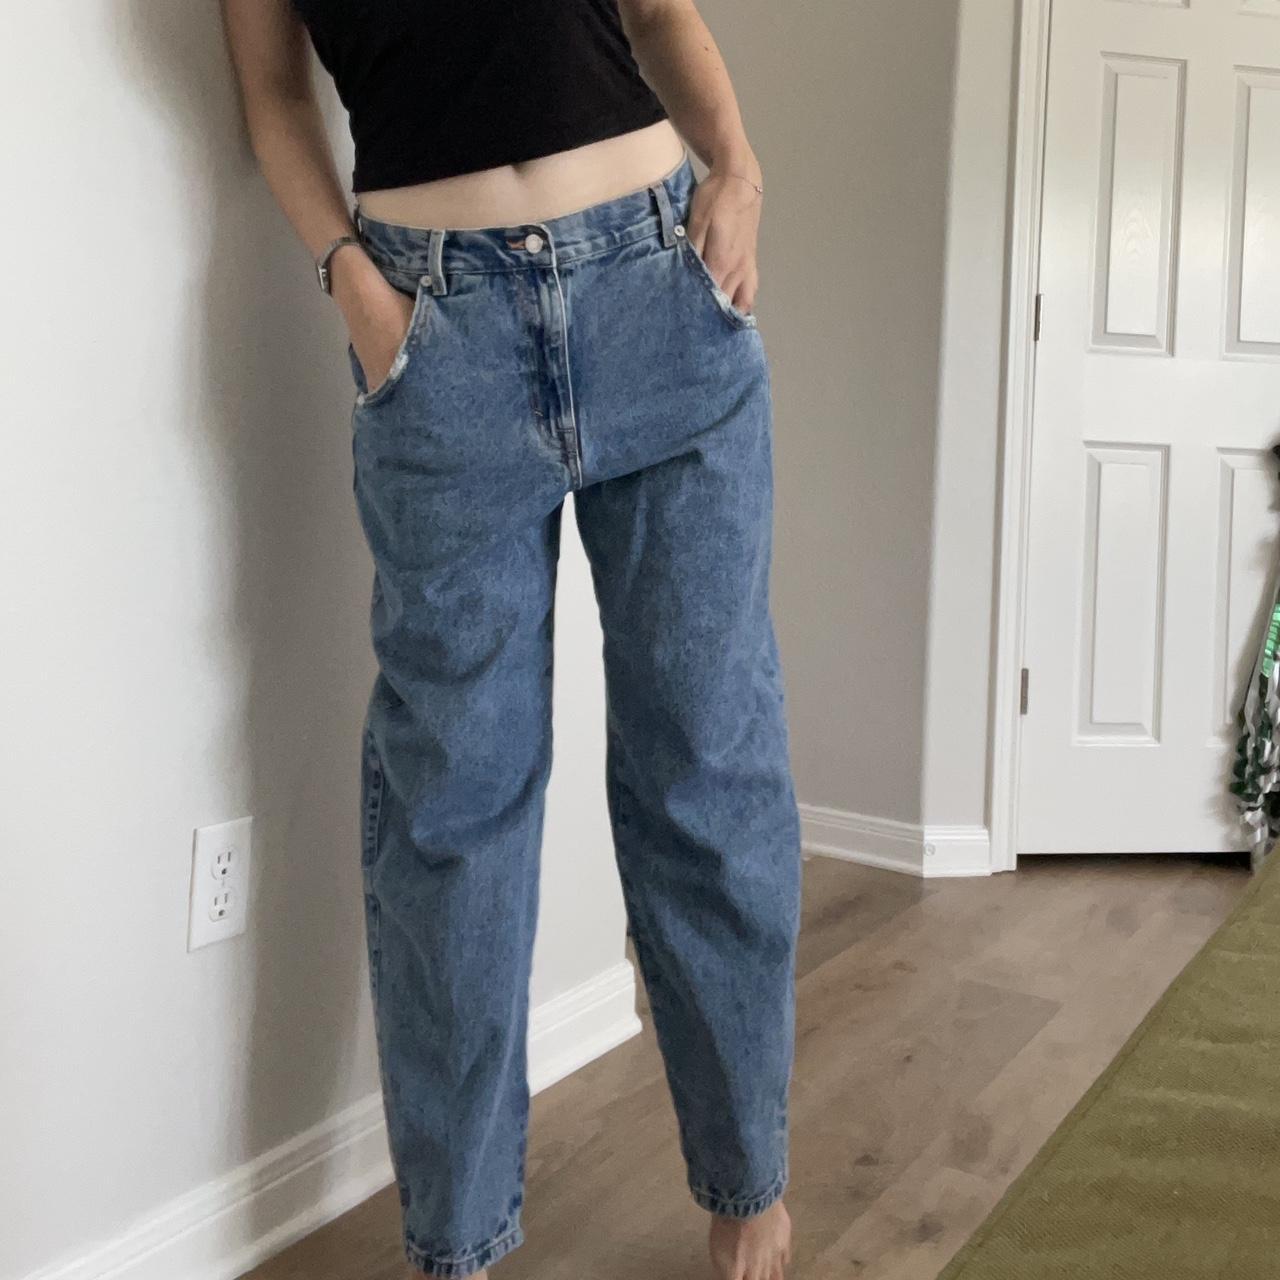 Comfiest pull&bear midrise baggy jeans👖, -Only worn a